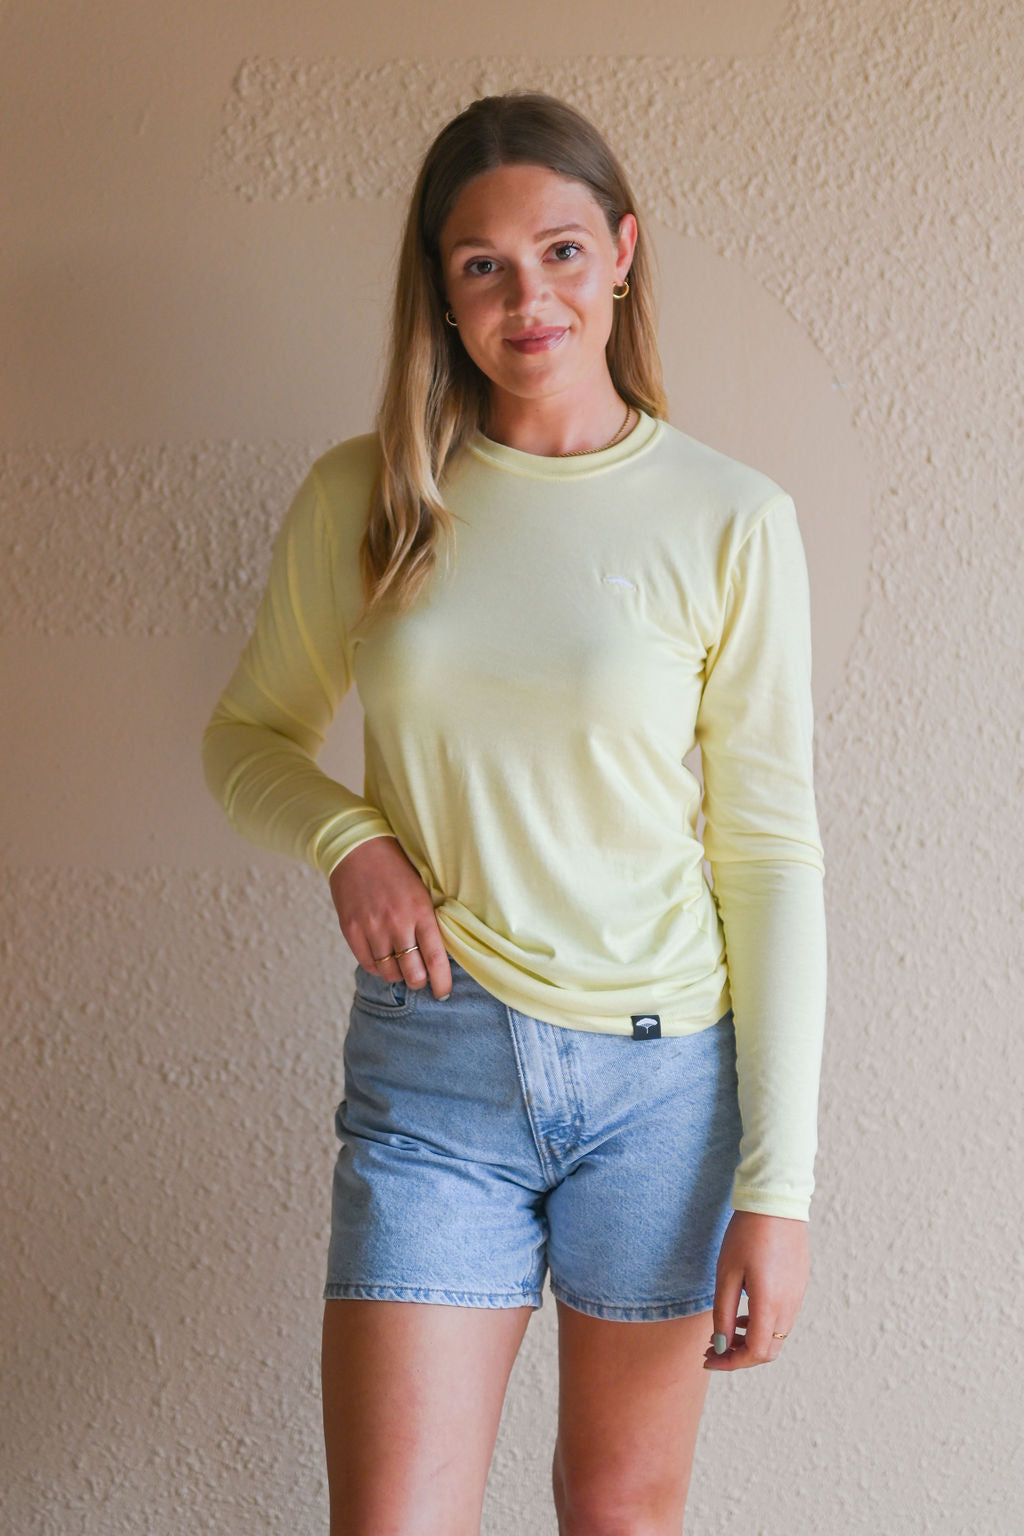 Unisex ethically made long sleeve yellow shirt with small white ungalli tree on front